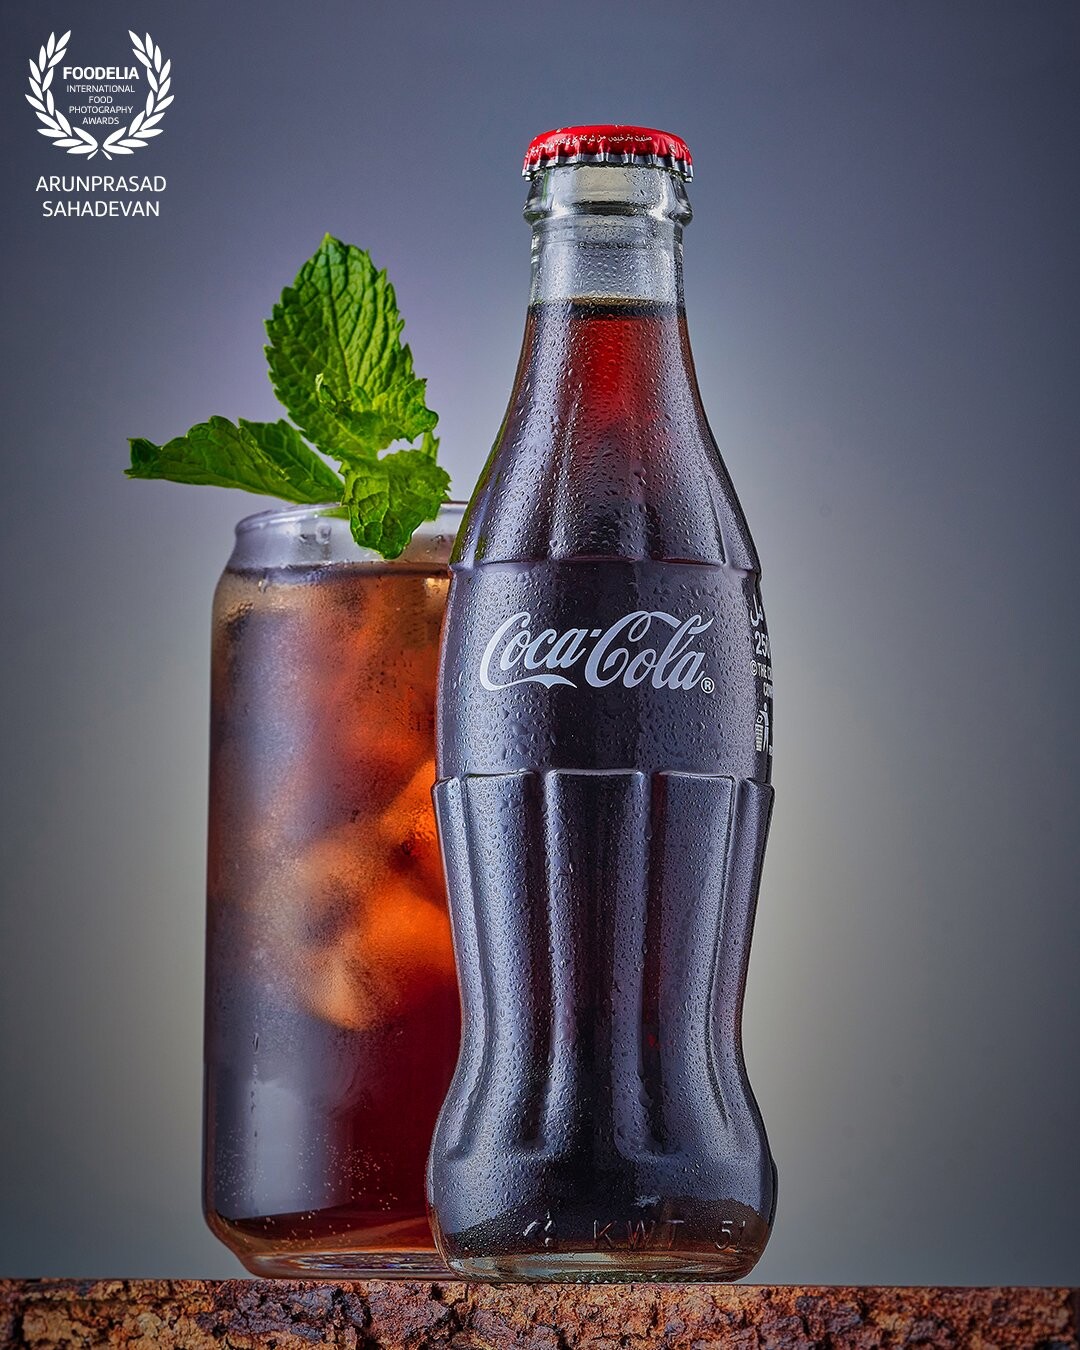 Coca Cola - product shot for my portfolio.<br />
I used four artificial light sources, softbox and a reflector, processed in capture one and luminar Neo.<br />
Sony A7R3 | Sony 90MM Macro | F11 | 1/160s | ISO 125